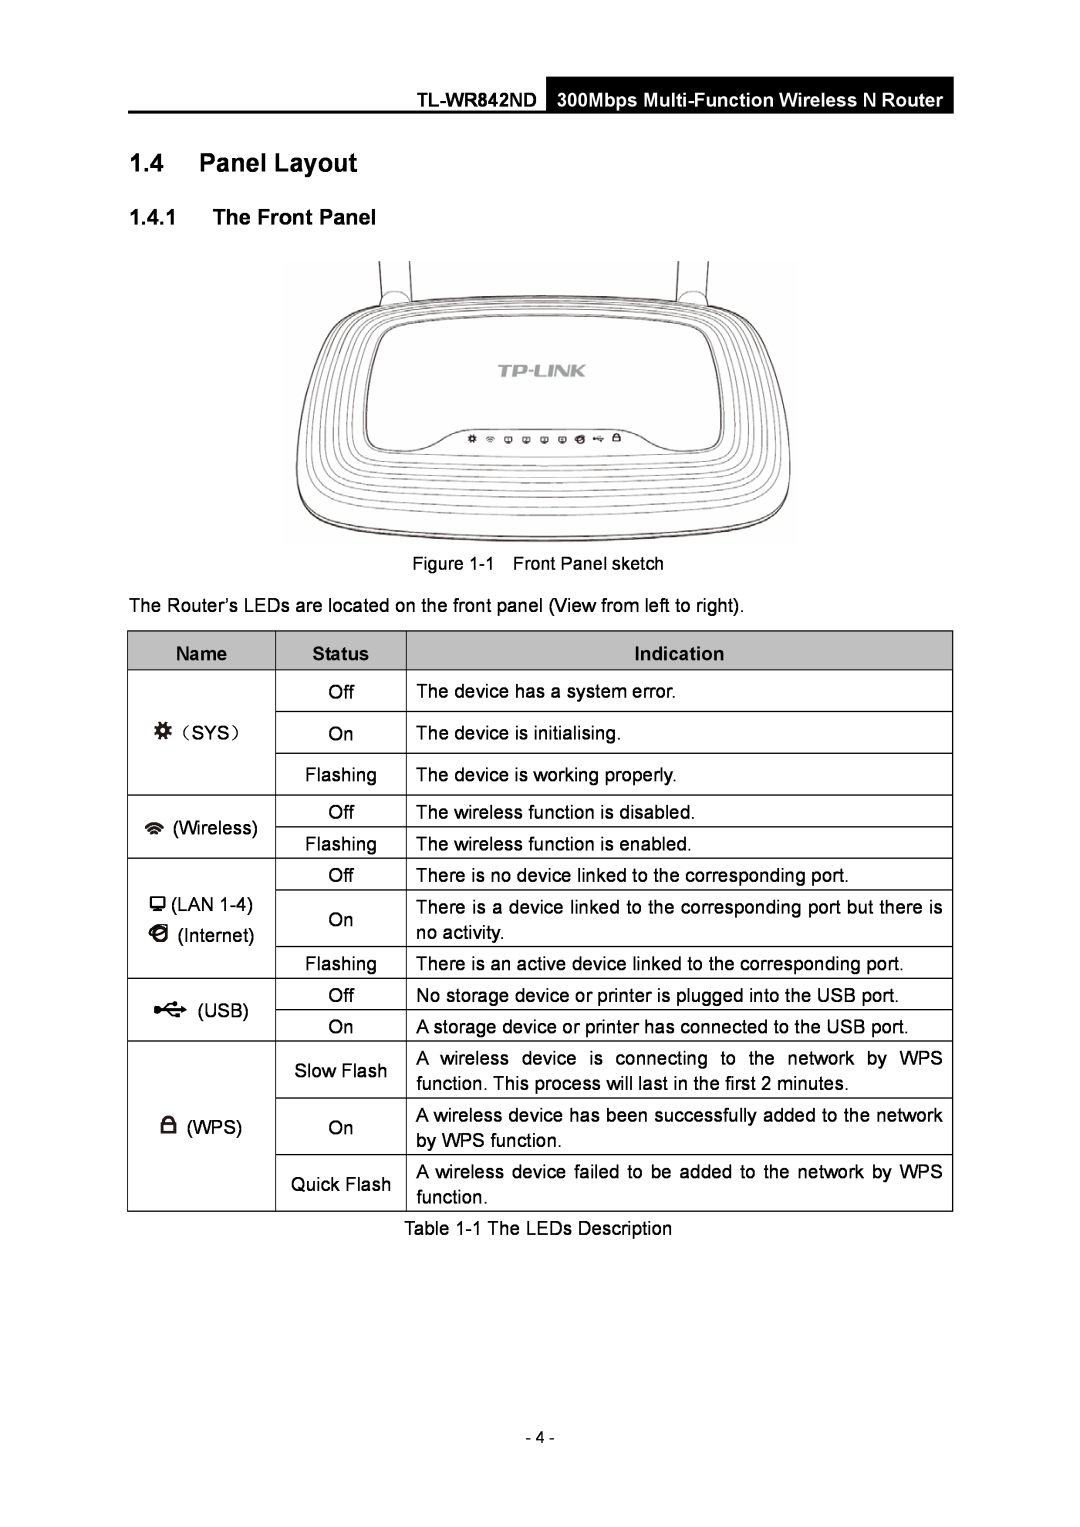 TP-Link WR-842ND manual Panel Layout, The Front Panel, Name, Status, Indication 